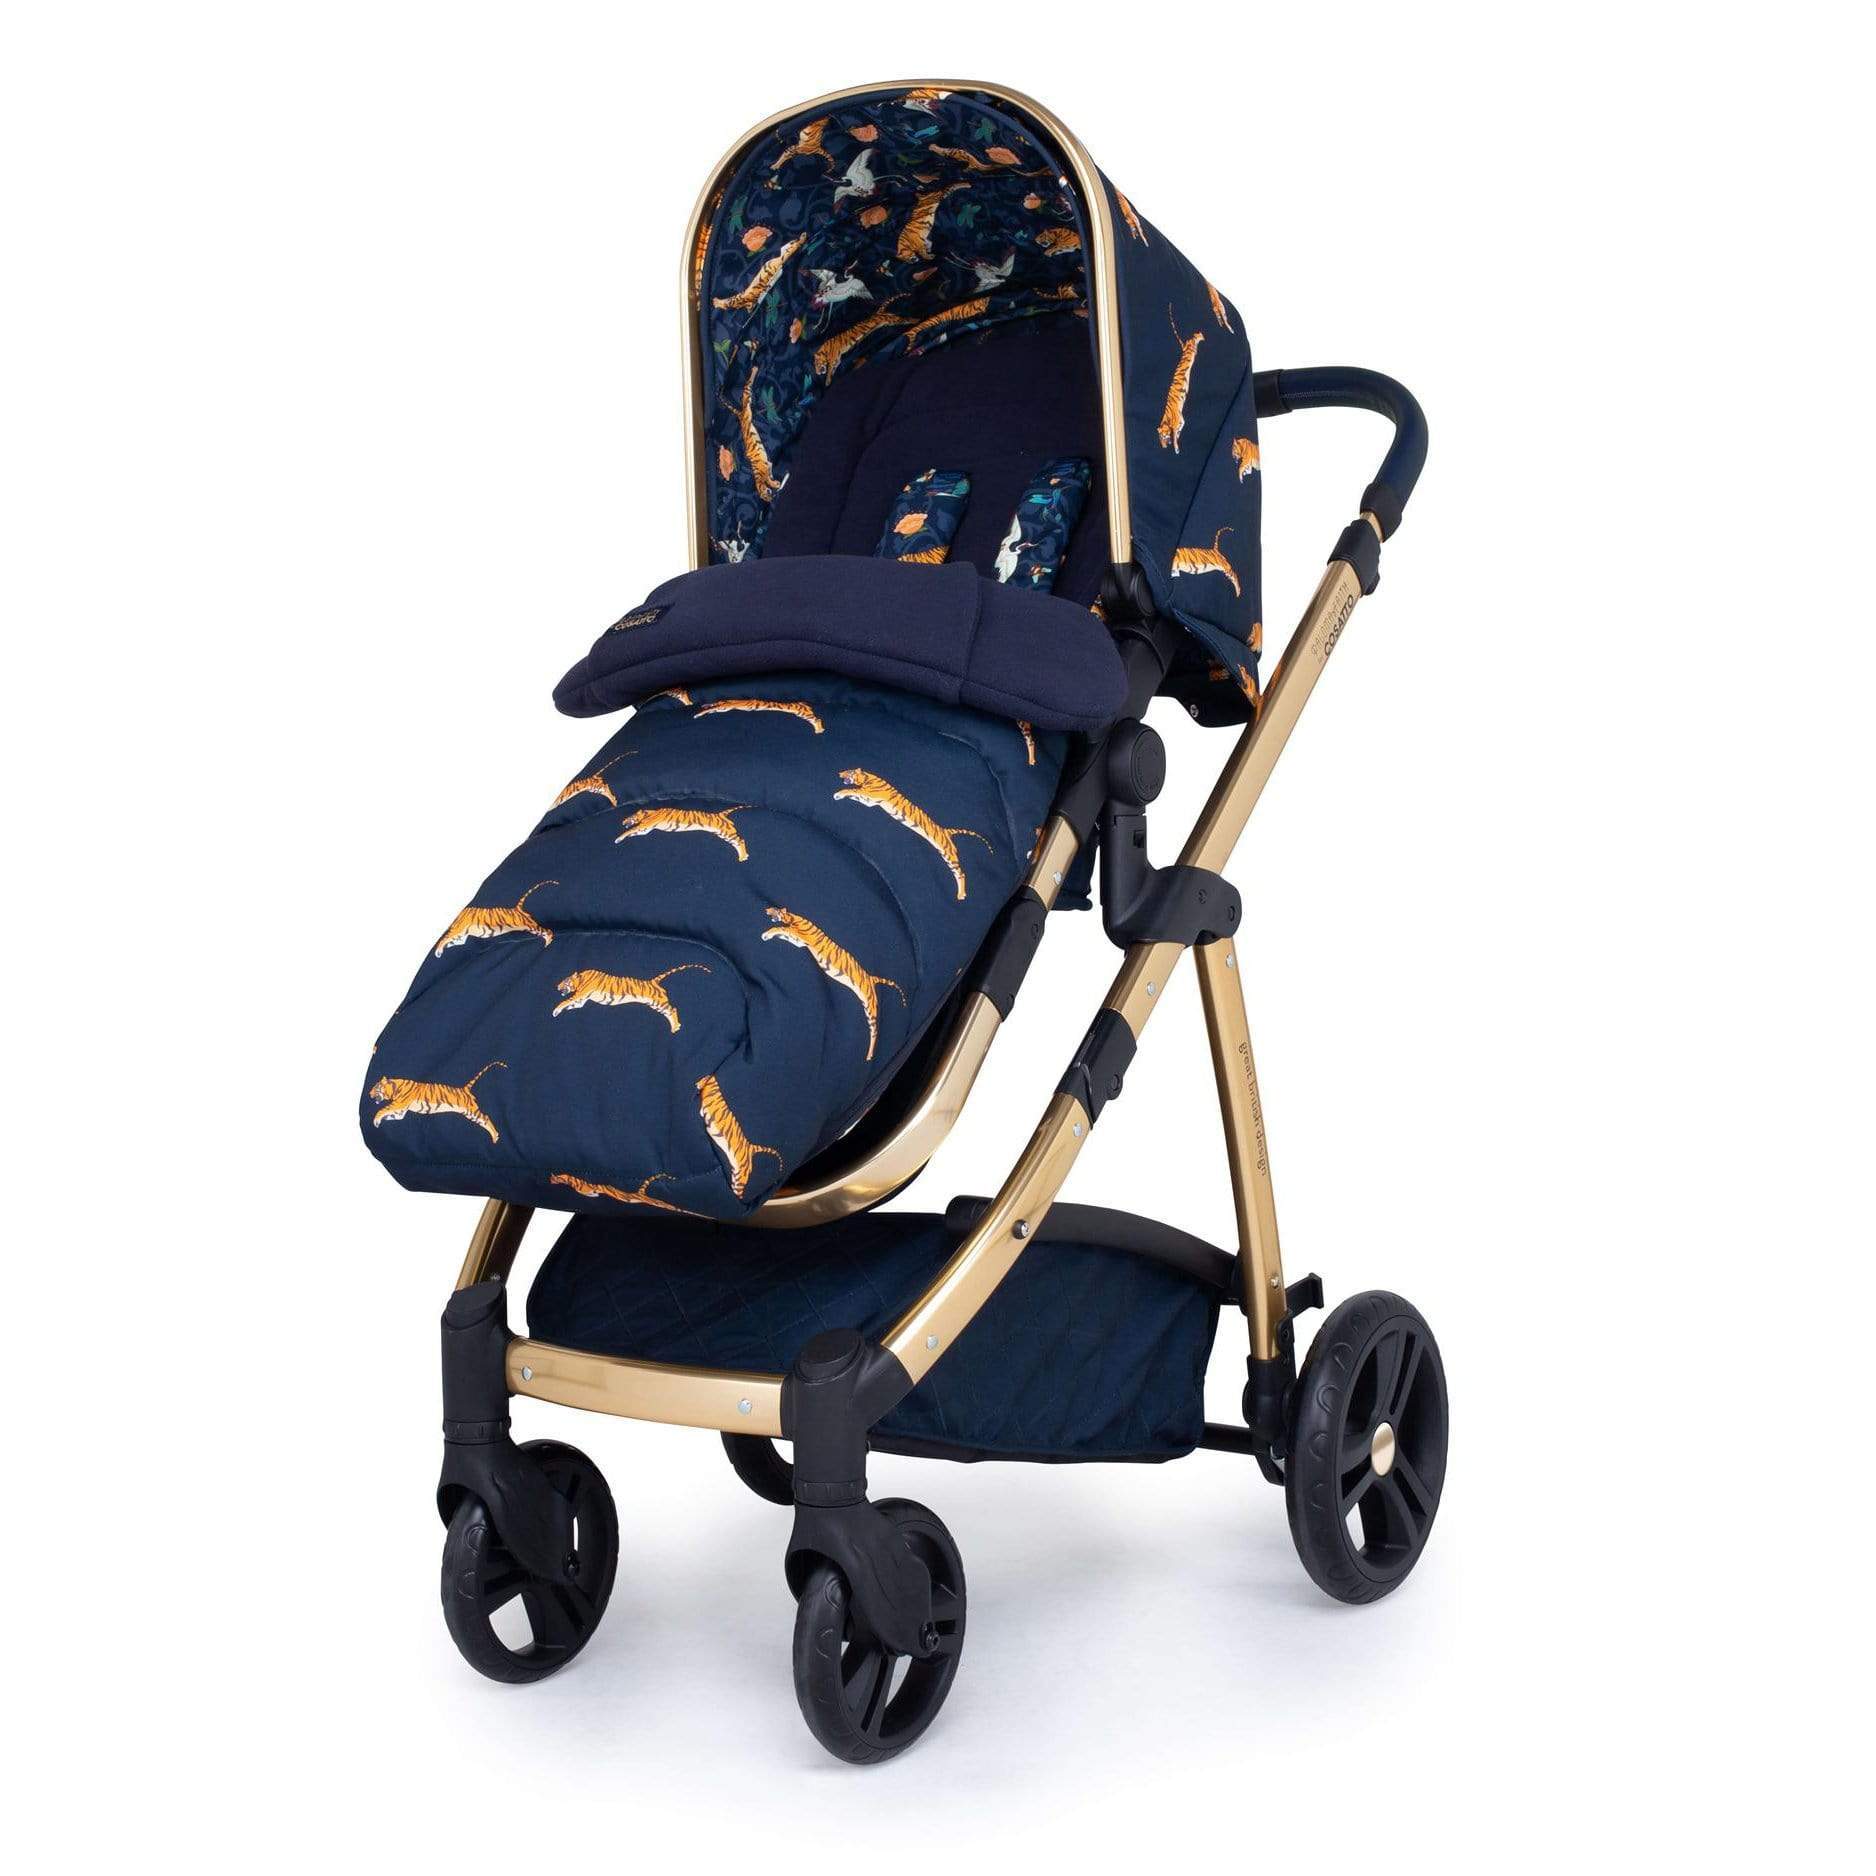 Cosatto baby prams Cosatto Wow Pram & Accessories On The Prowl Special Edition CT4431